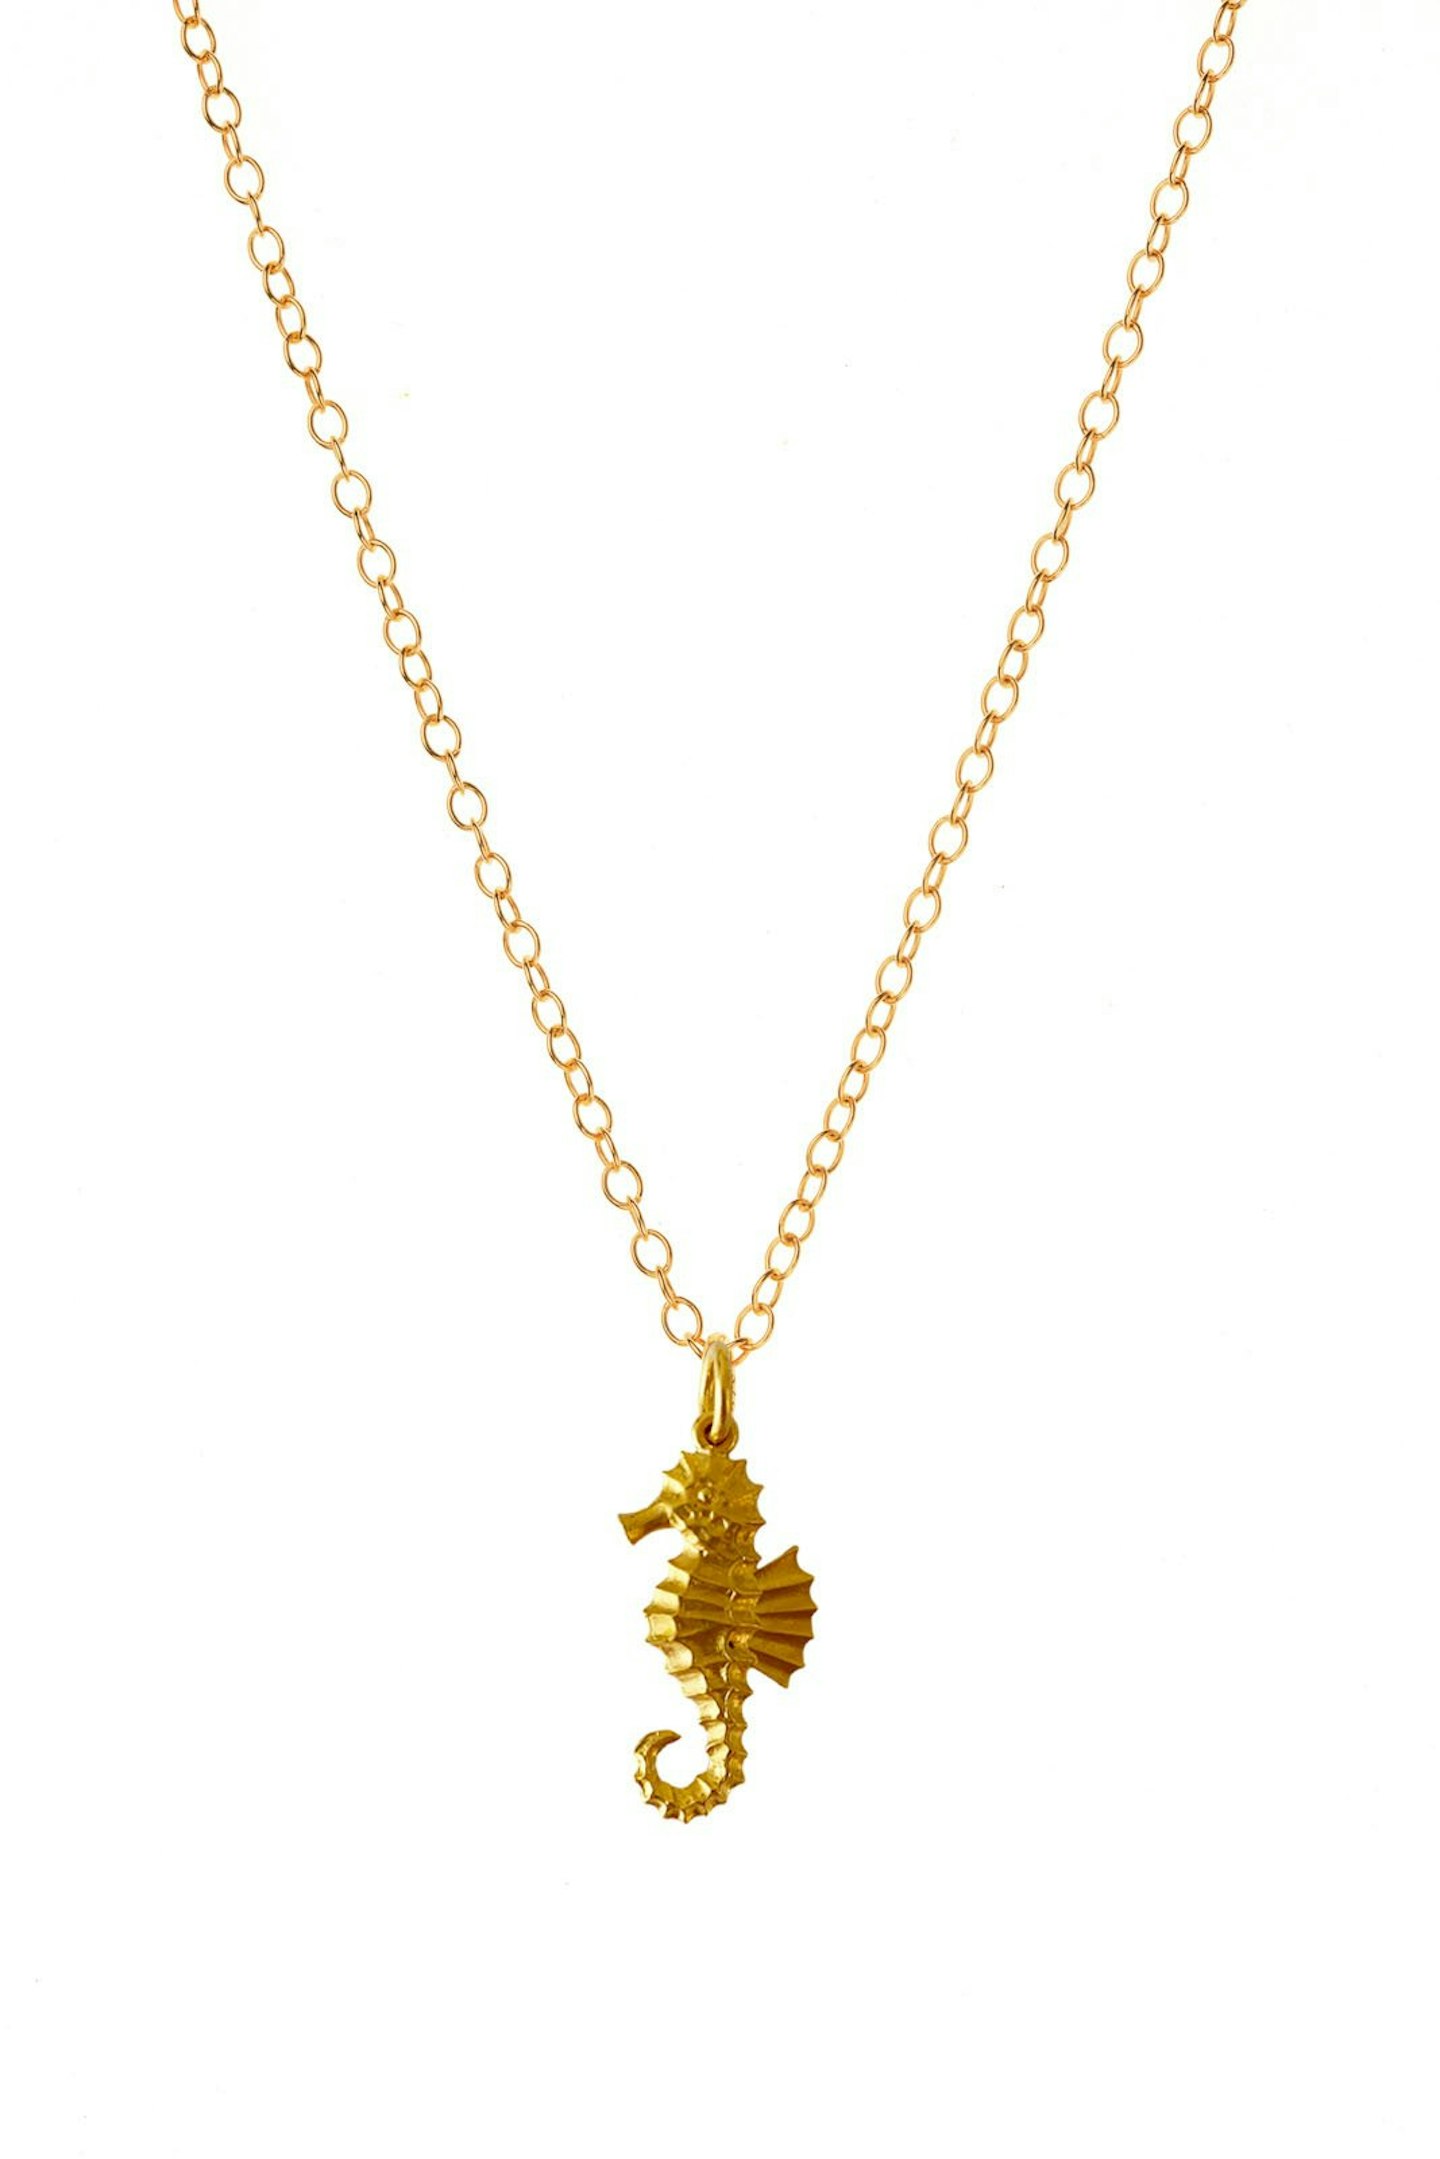 Emary, Gold Detailed Seahorse Charm Necklace, £105